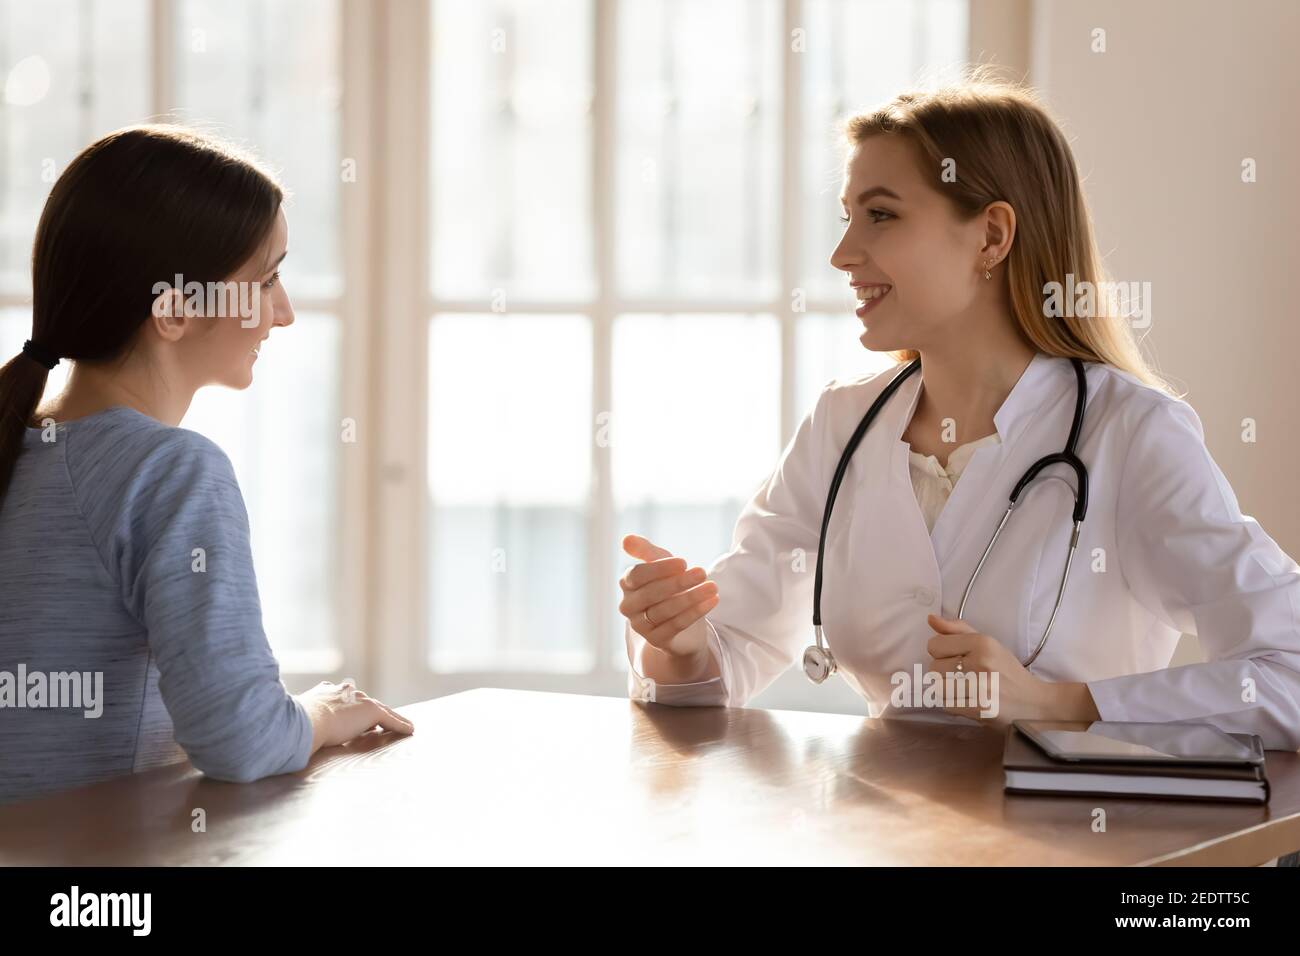 Happy woman enjoying checkup visit with doctor. Stock Photo